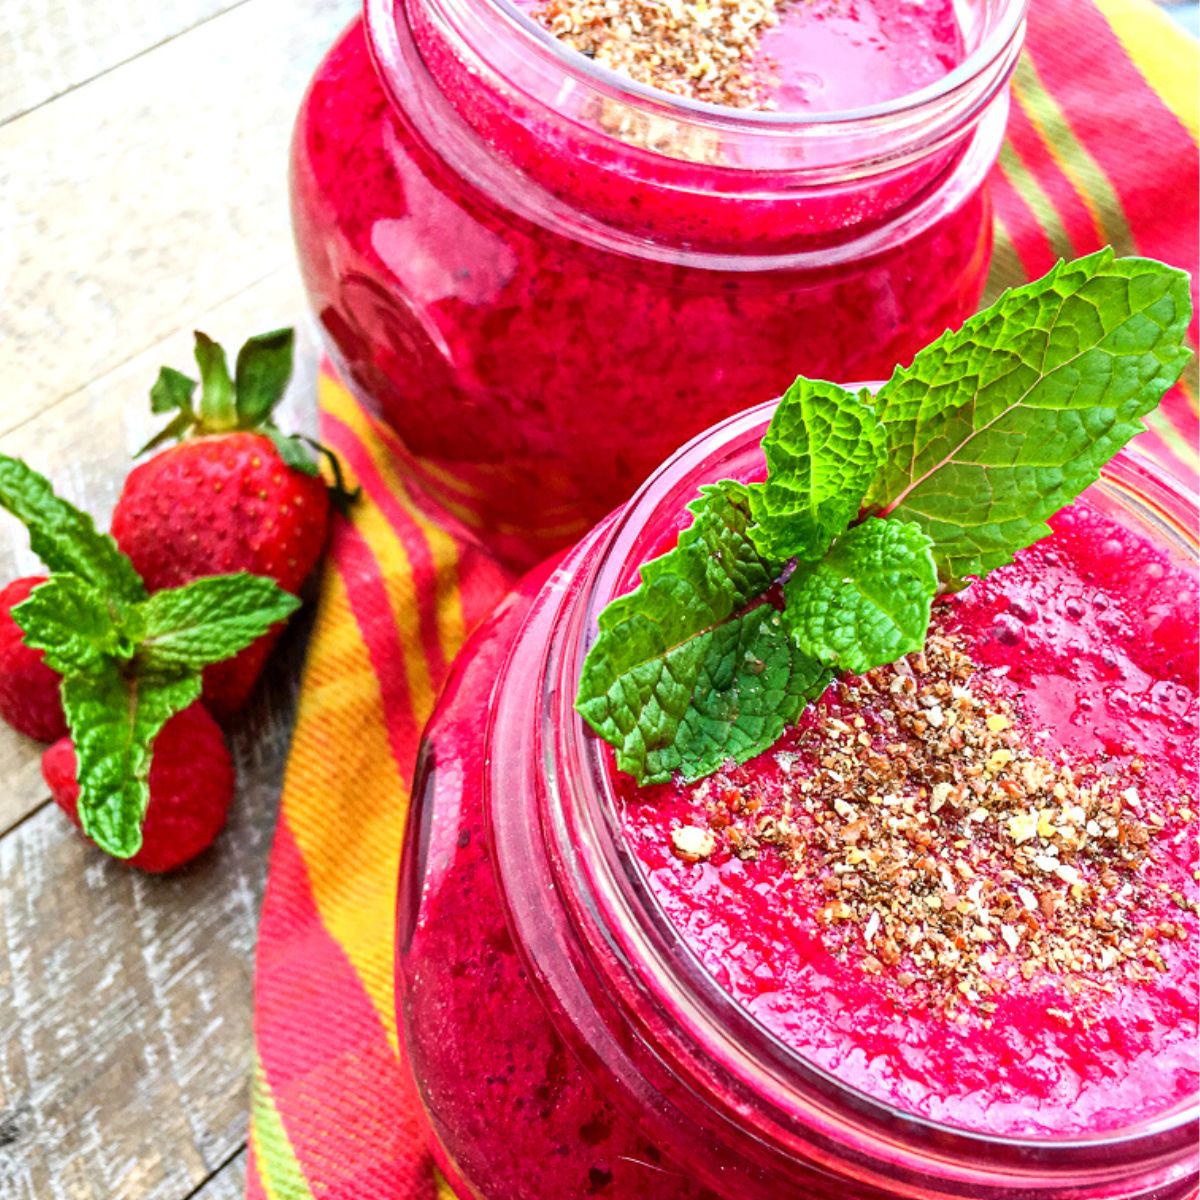 REFRESHING BERRY SMOOTHIES